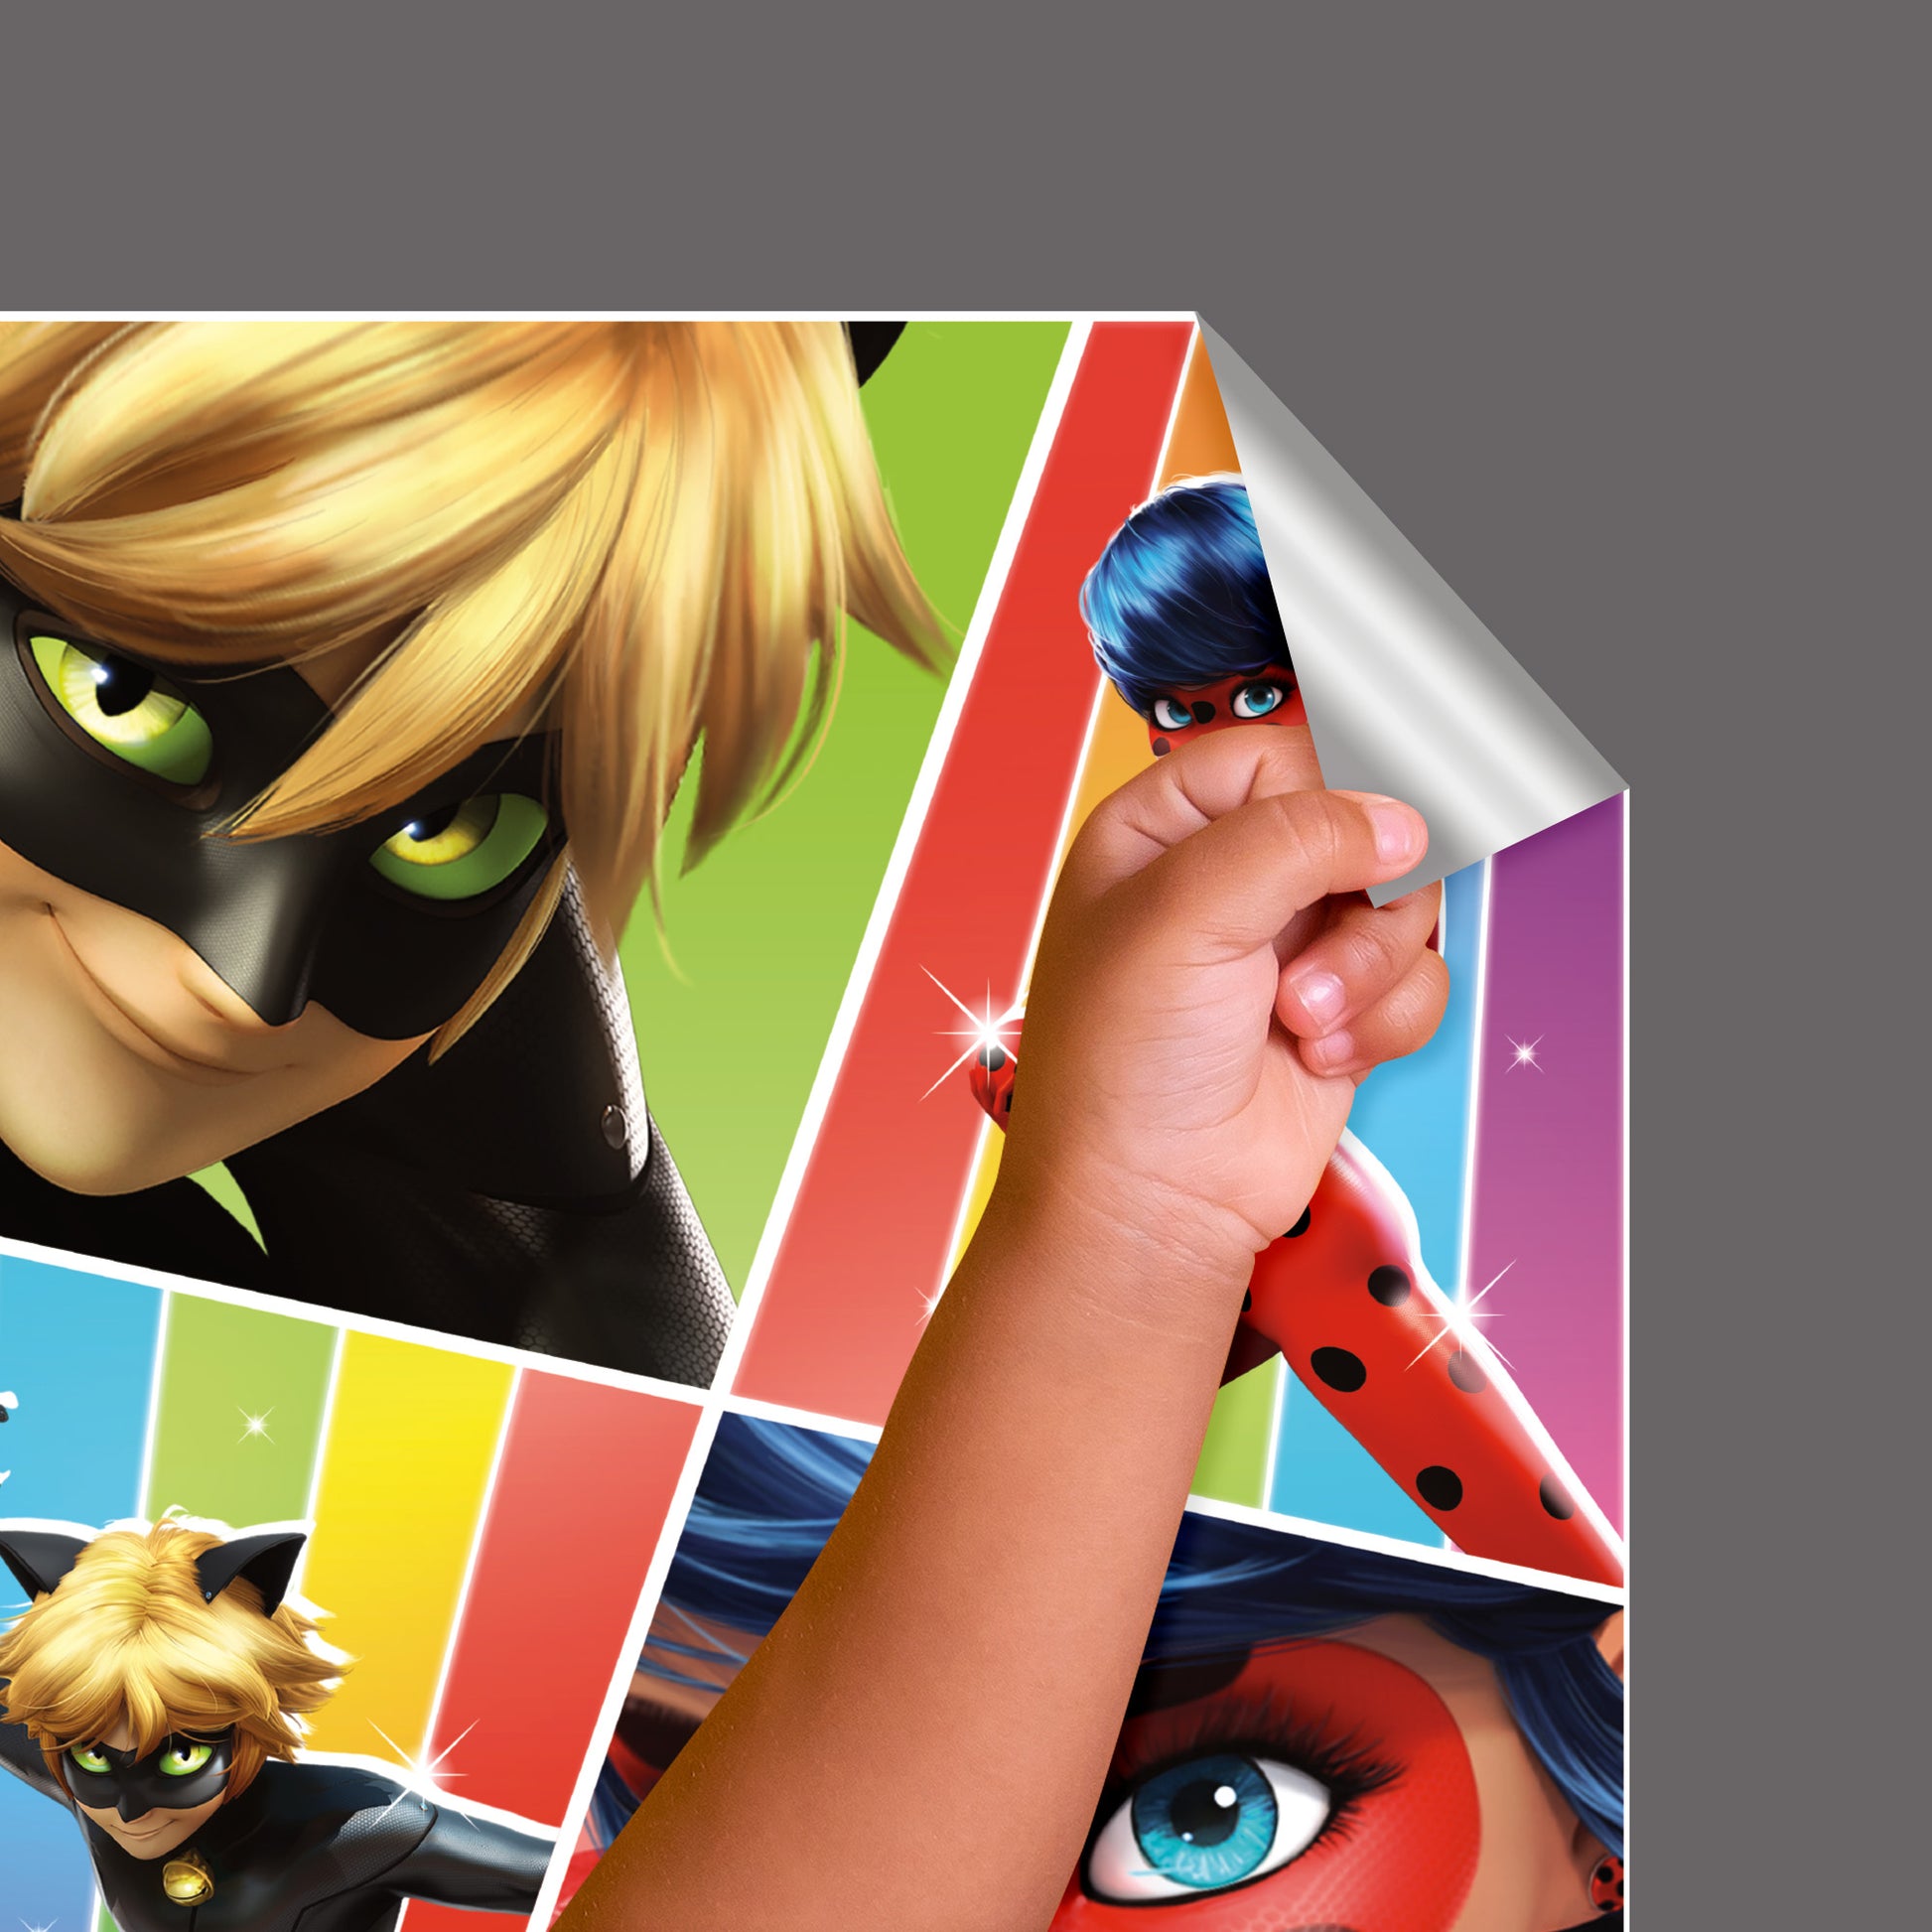 Miraculous: Ladybug RealBig - Officially Licensed Zag Removable Adhesive  Decal